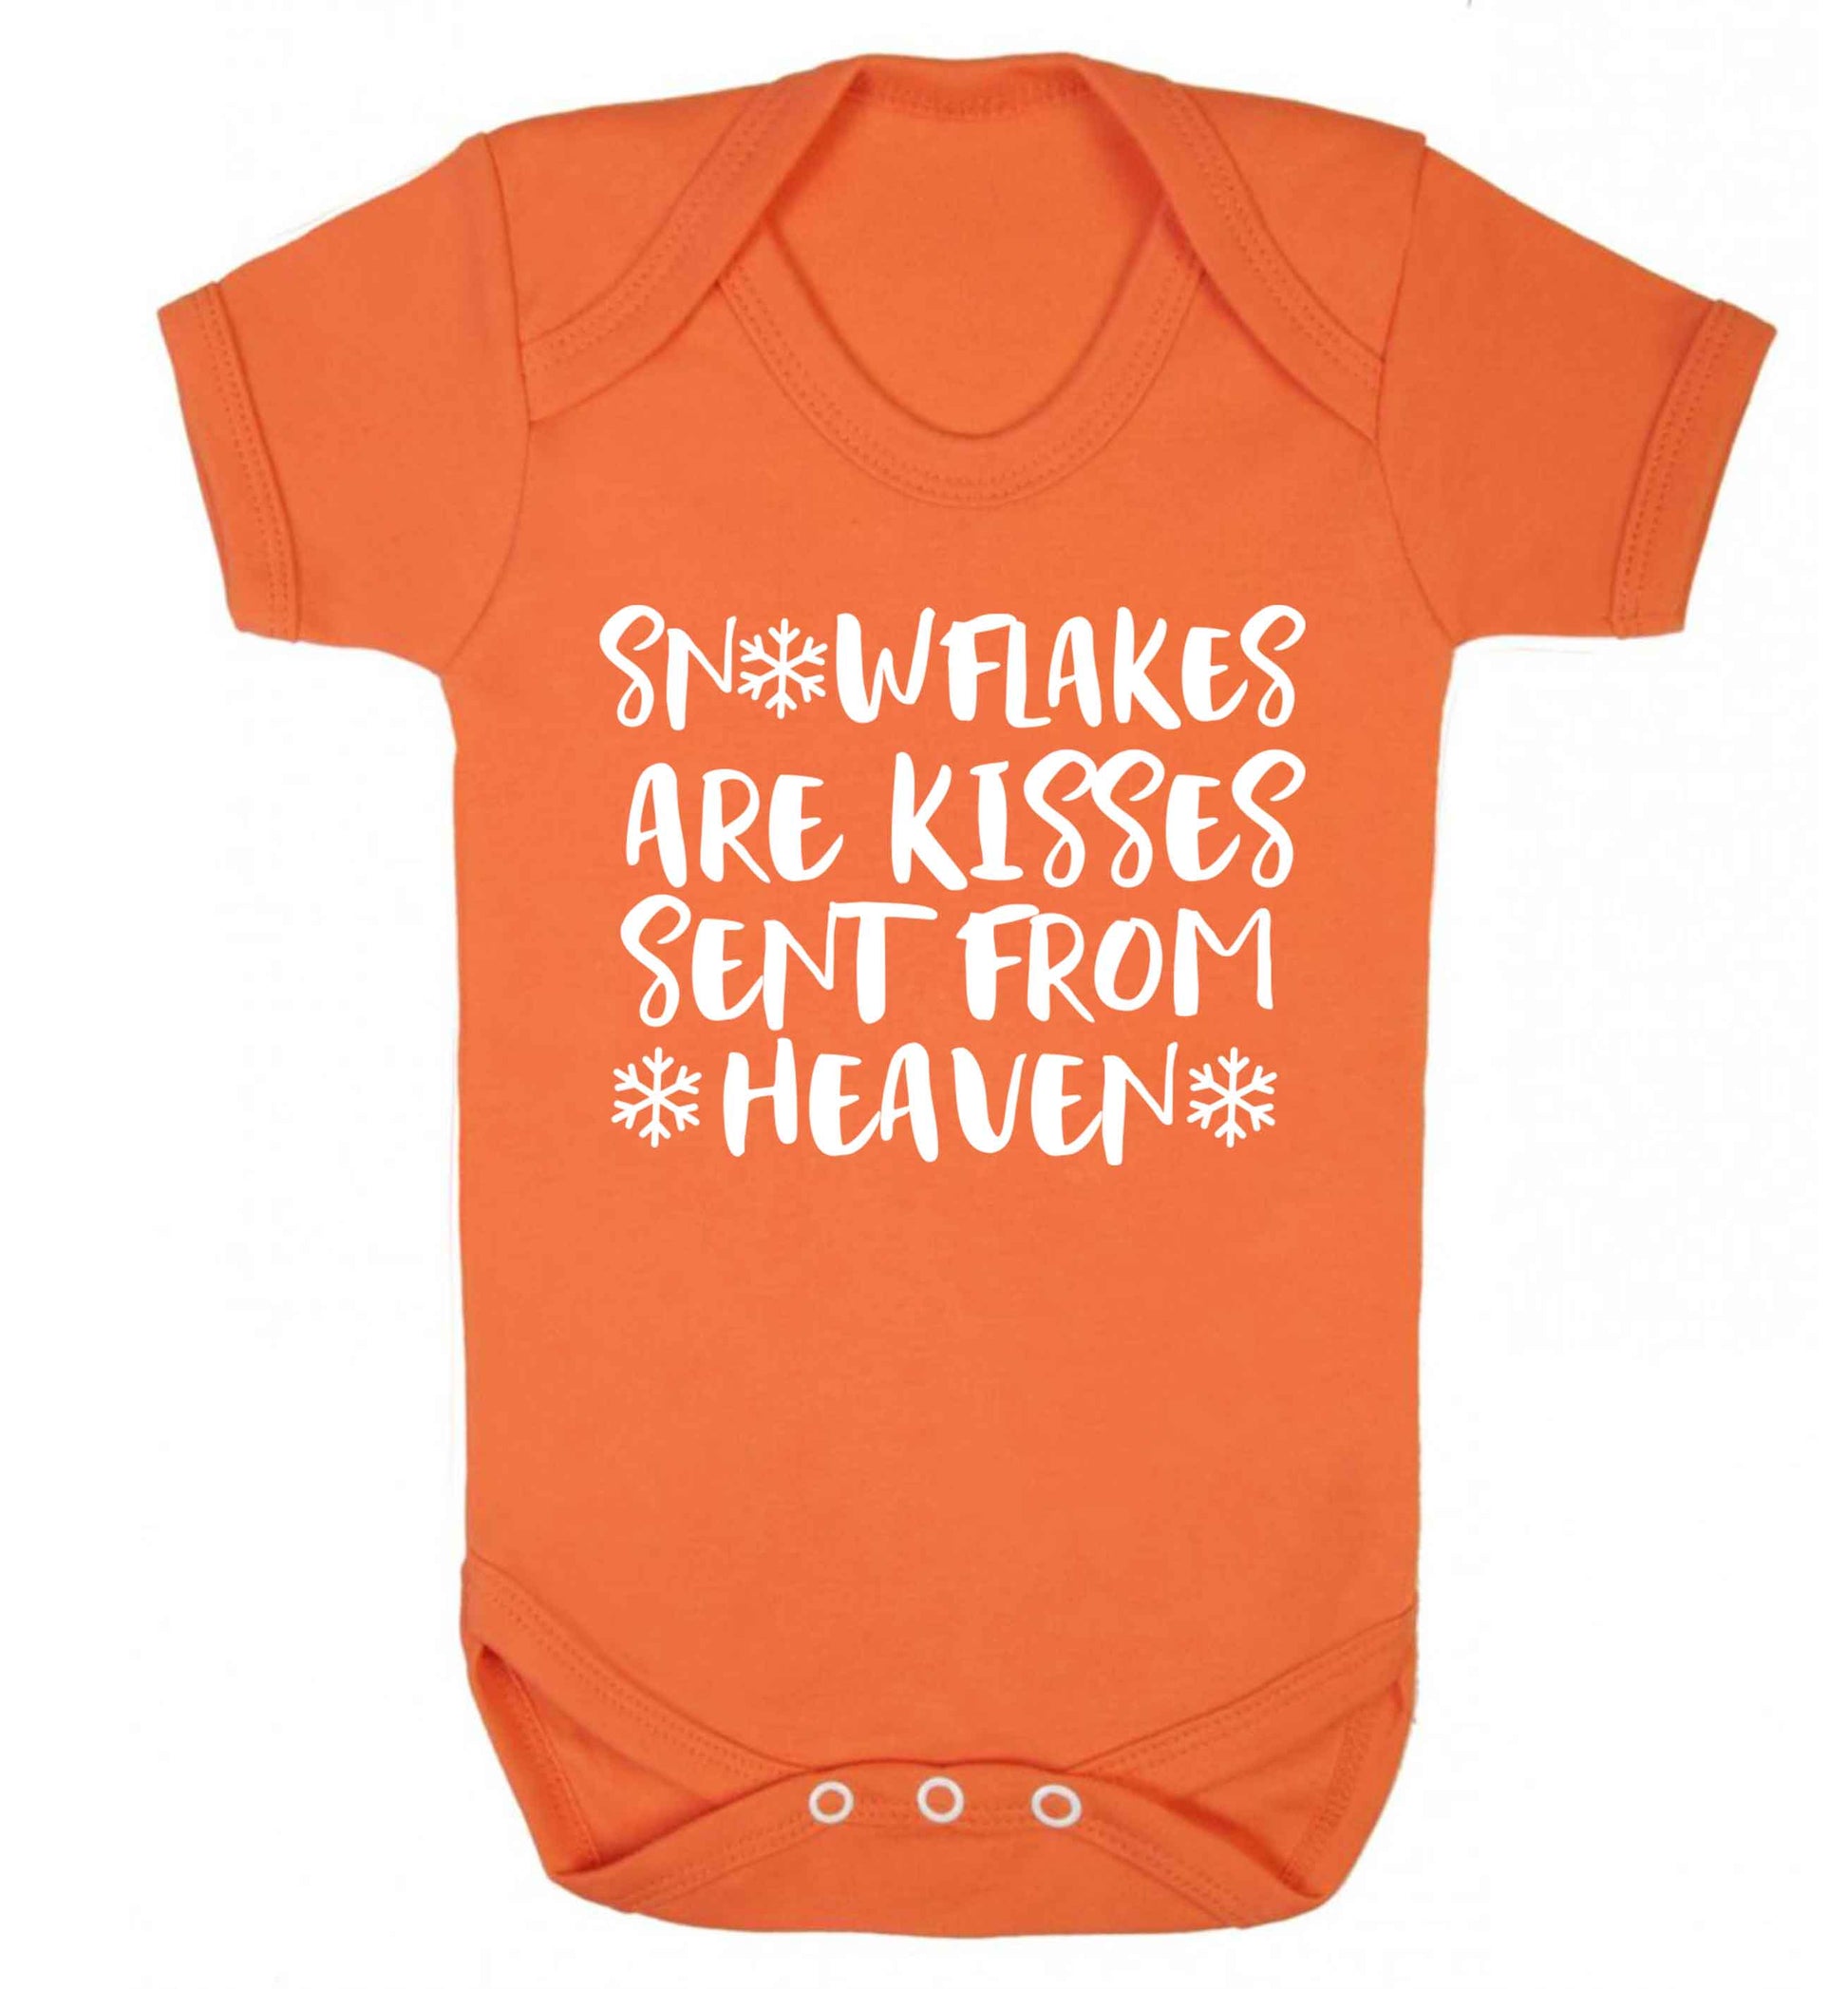 Snowflakes are kisses sent from heaven Baby Vest orange 18-24 months